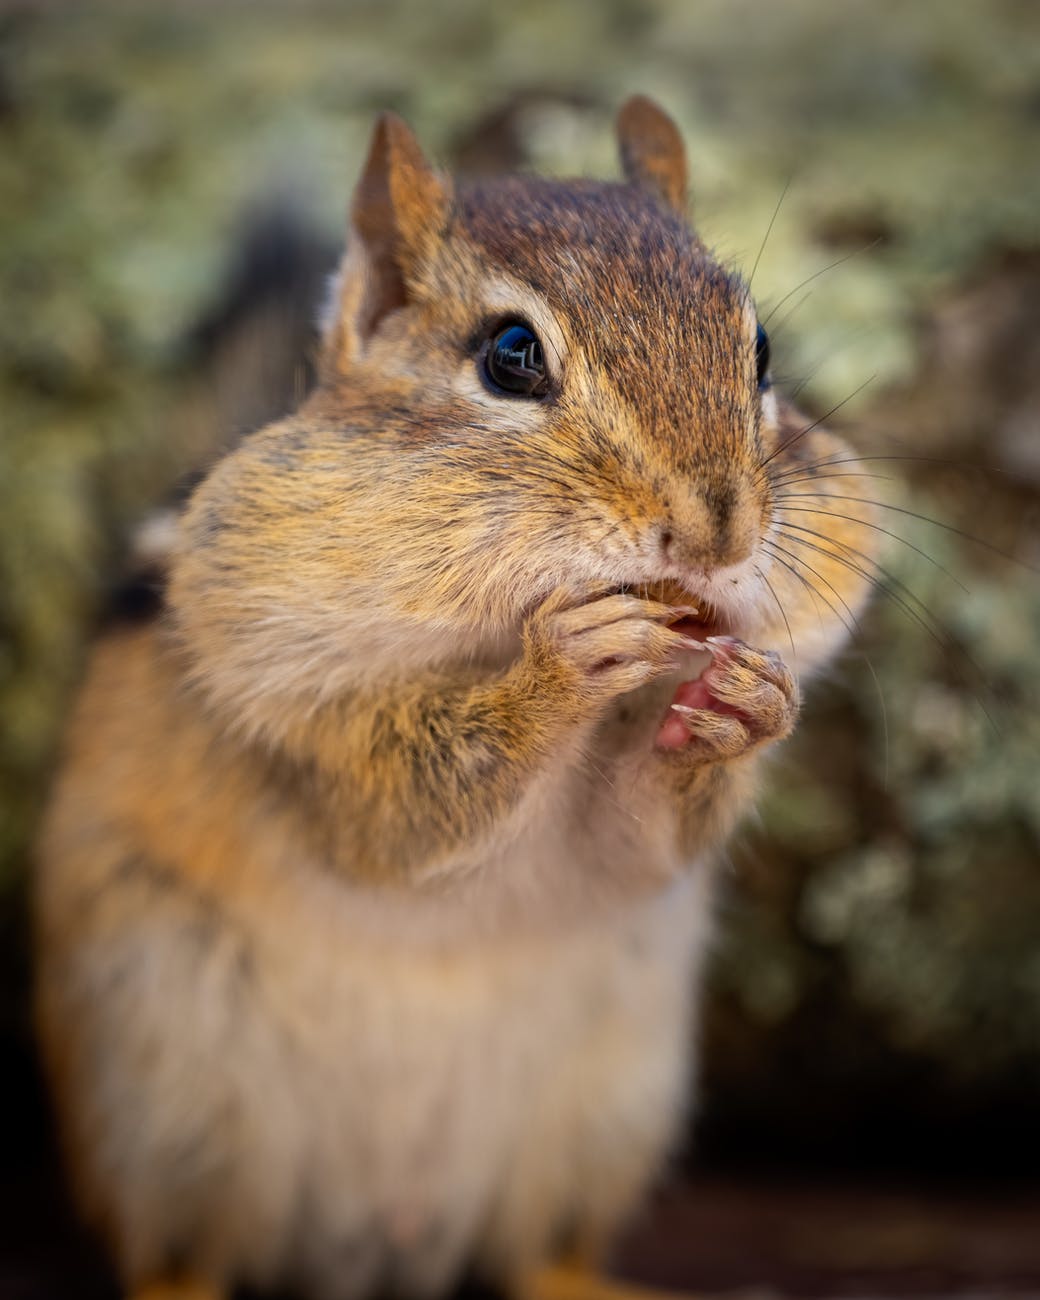 curious chipmunk chewing nuts on grassy ground